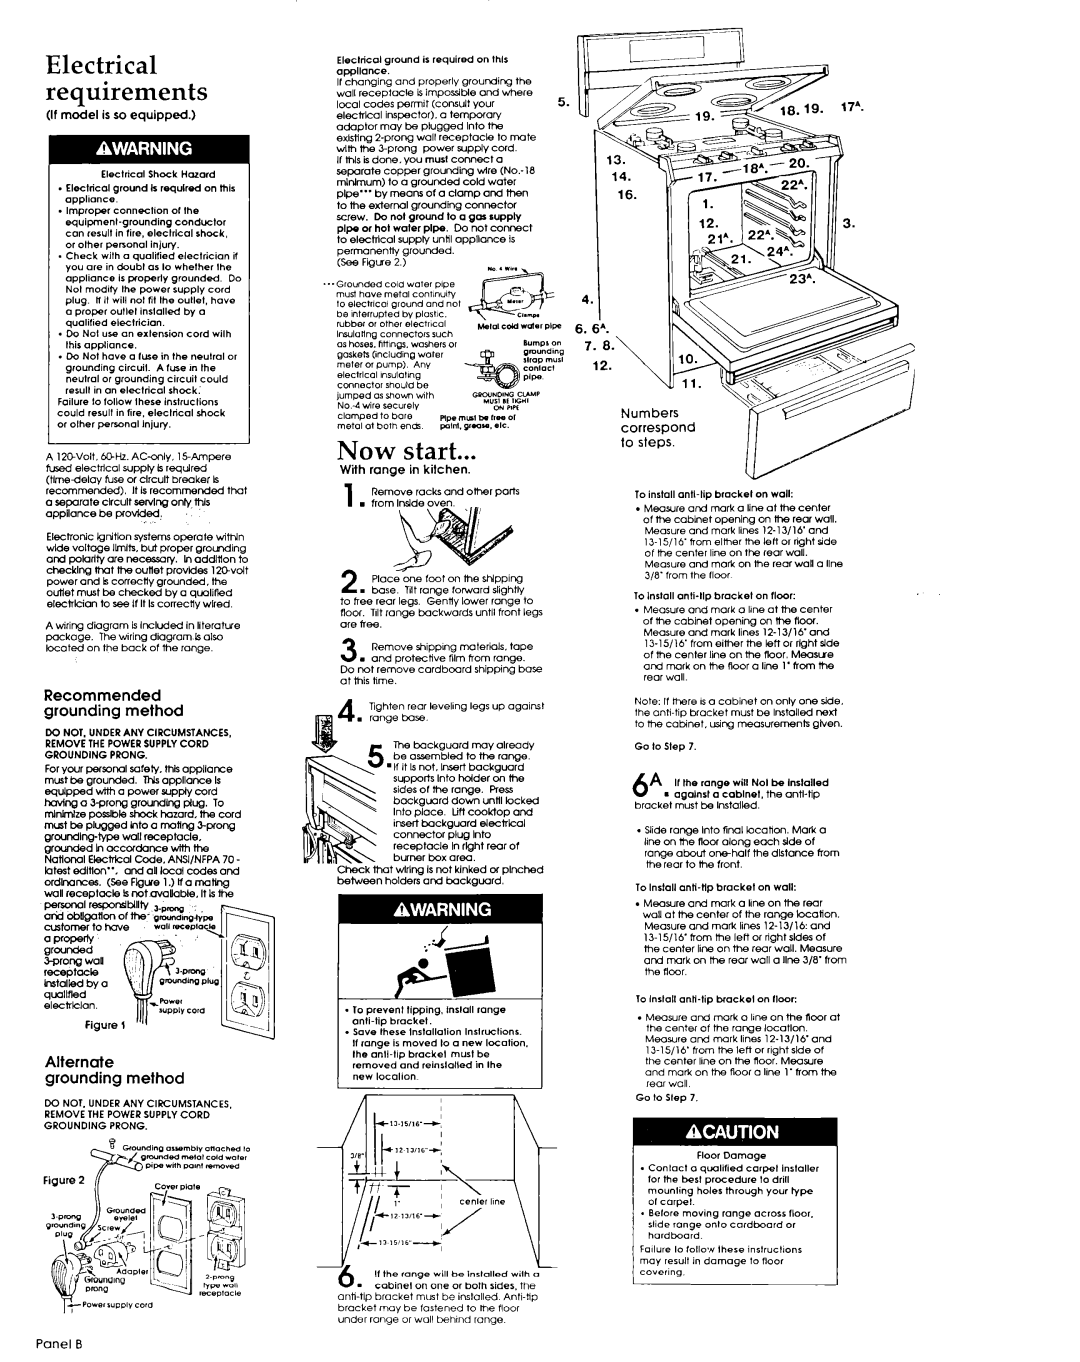 Whirlpool 76724.CO/4320880 installation instructions start, Electrical requirements, Alternate grounding method 